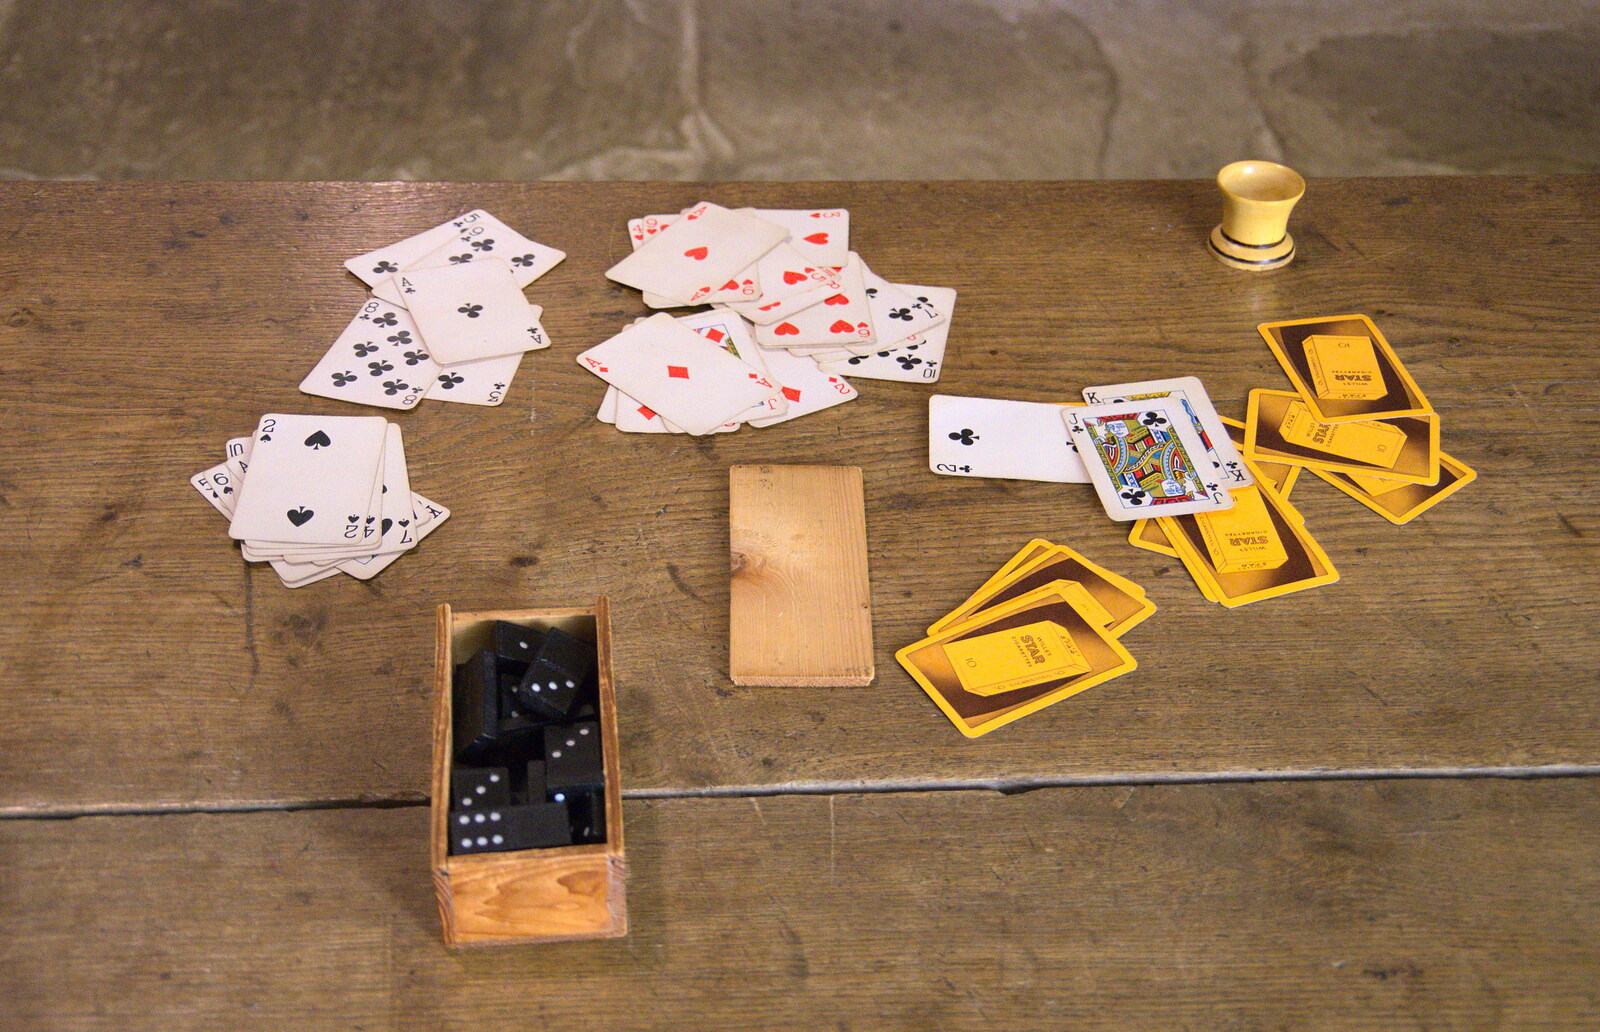 Cards and dominoes from Life Below Stairs, Ickworth House, Horringer, Suffolk - 28th January 2018